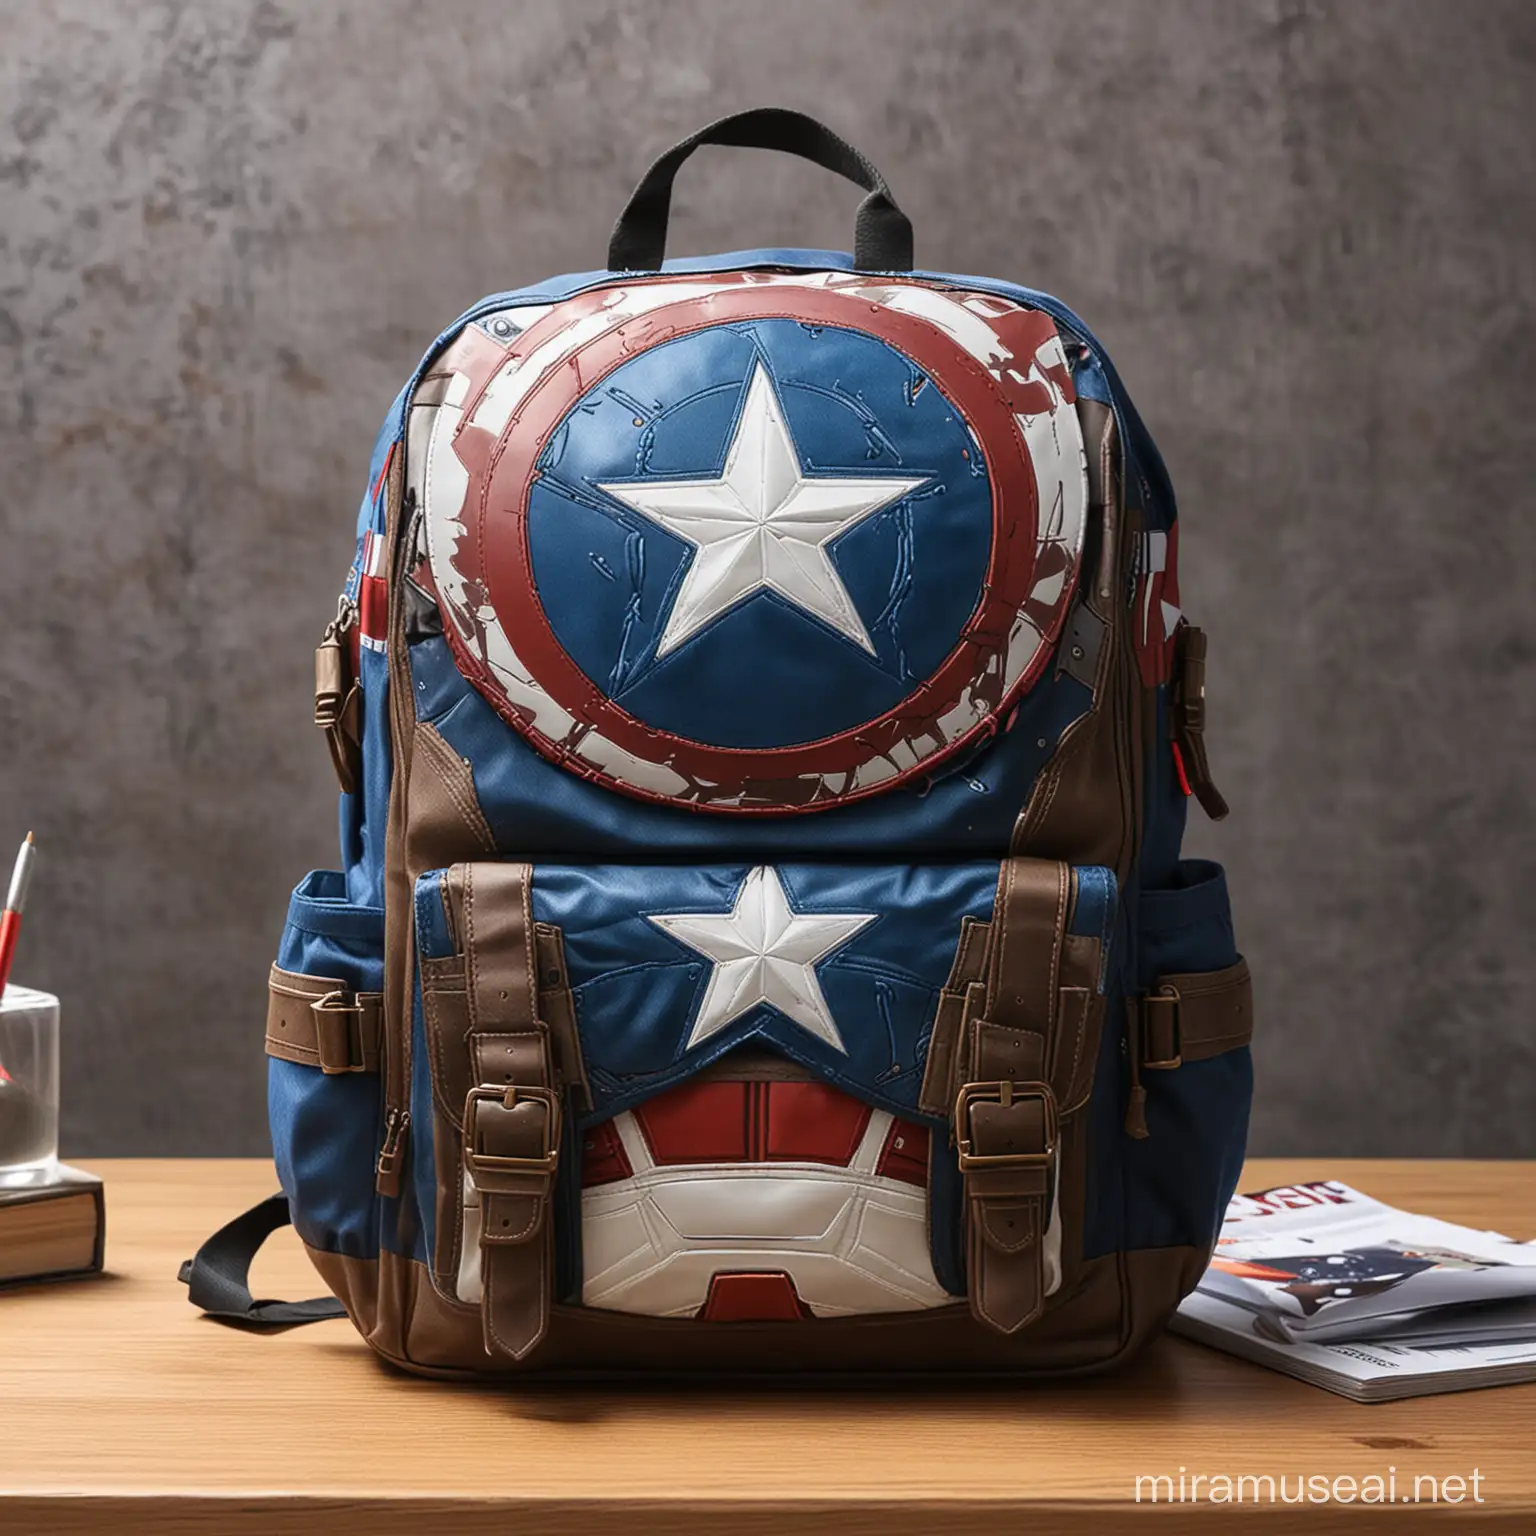 Captain America Style Backpack on the Table